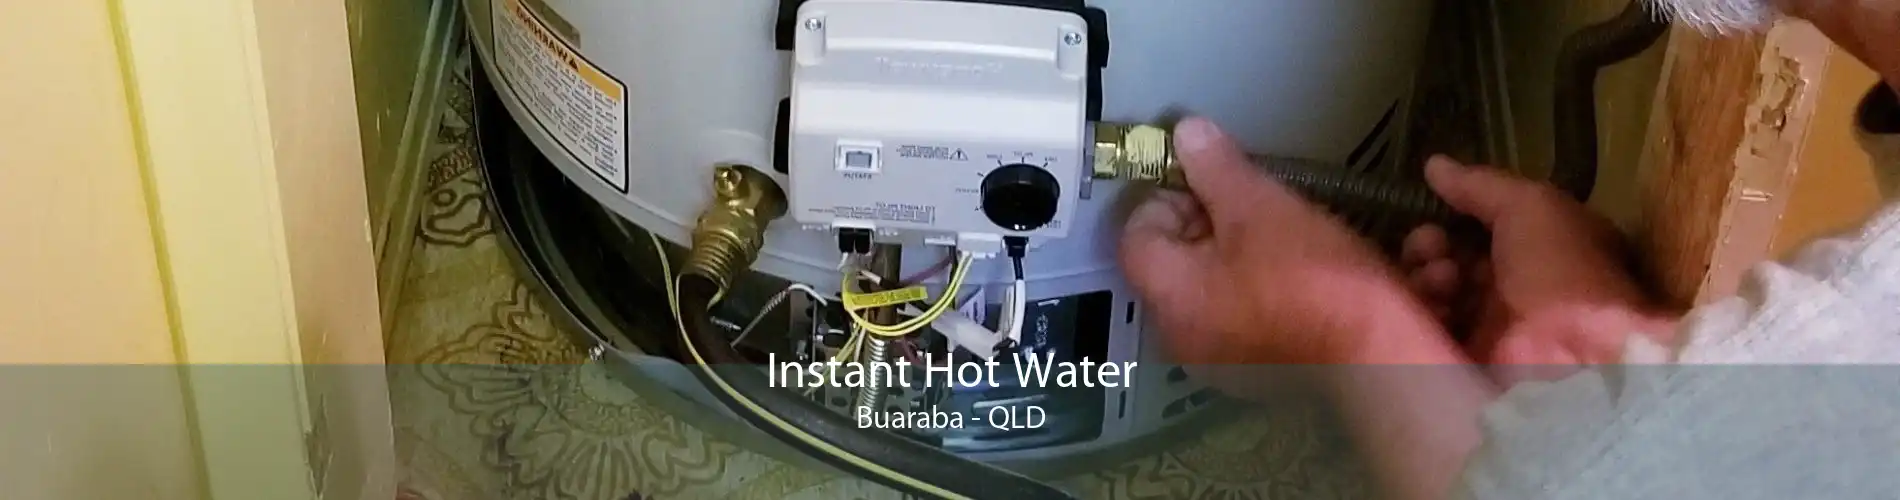 Instant Hot Water Buaraba - QLD